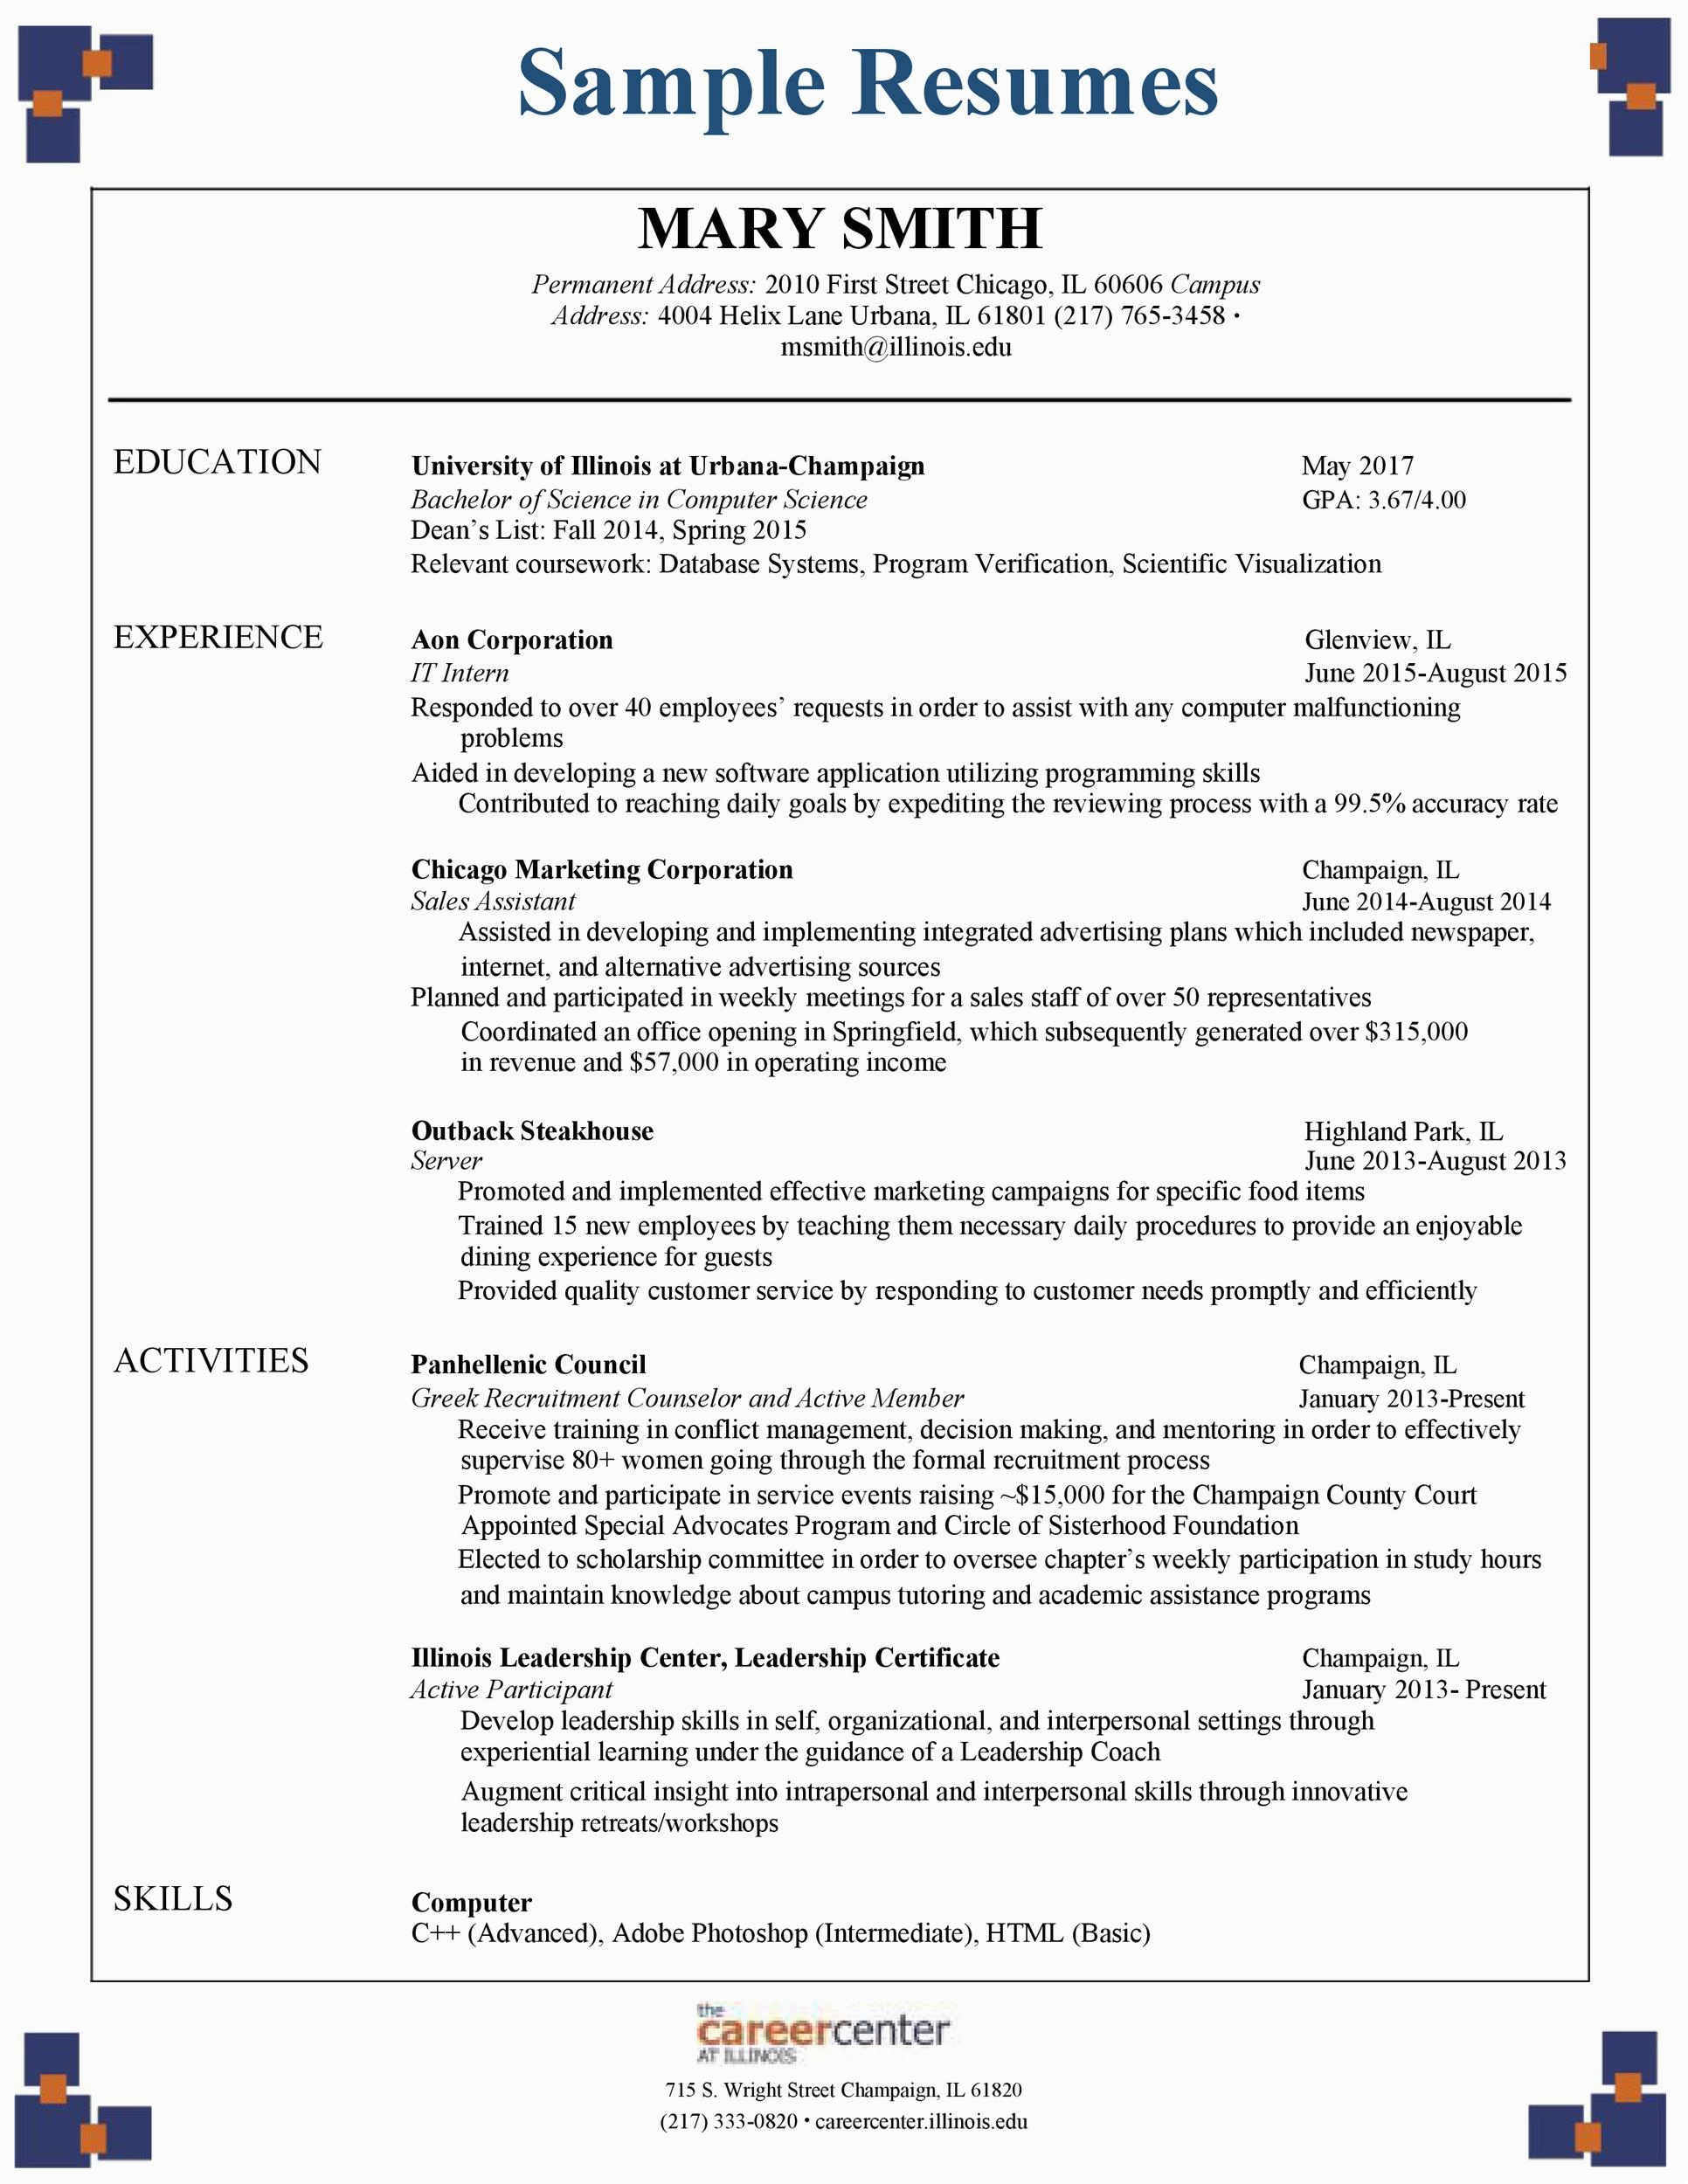 Sample Resume for College Application Template College Application Resume Template Resume Templates for